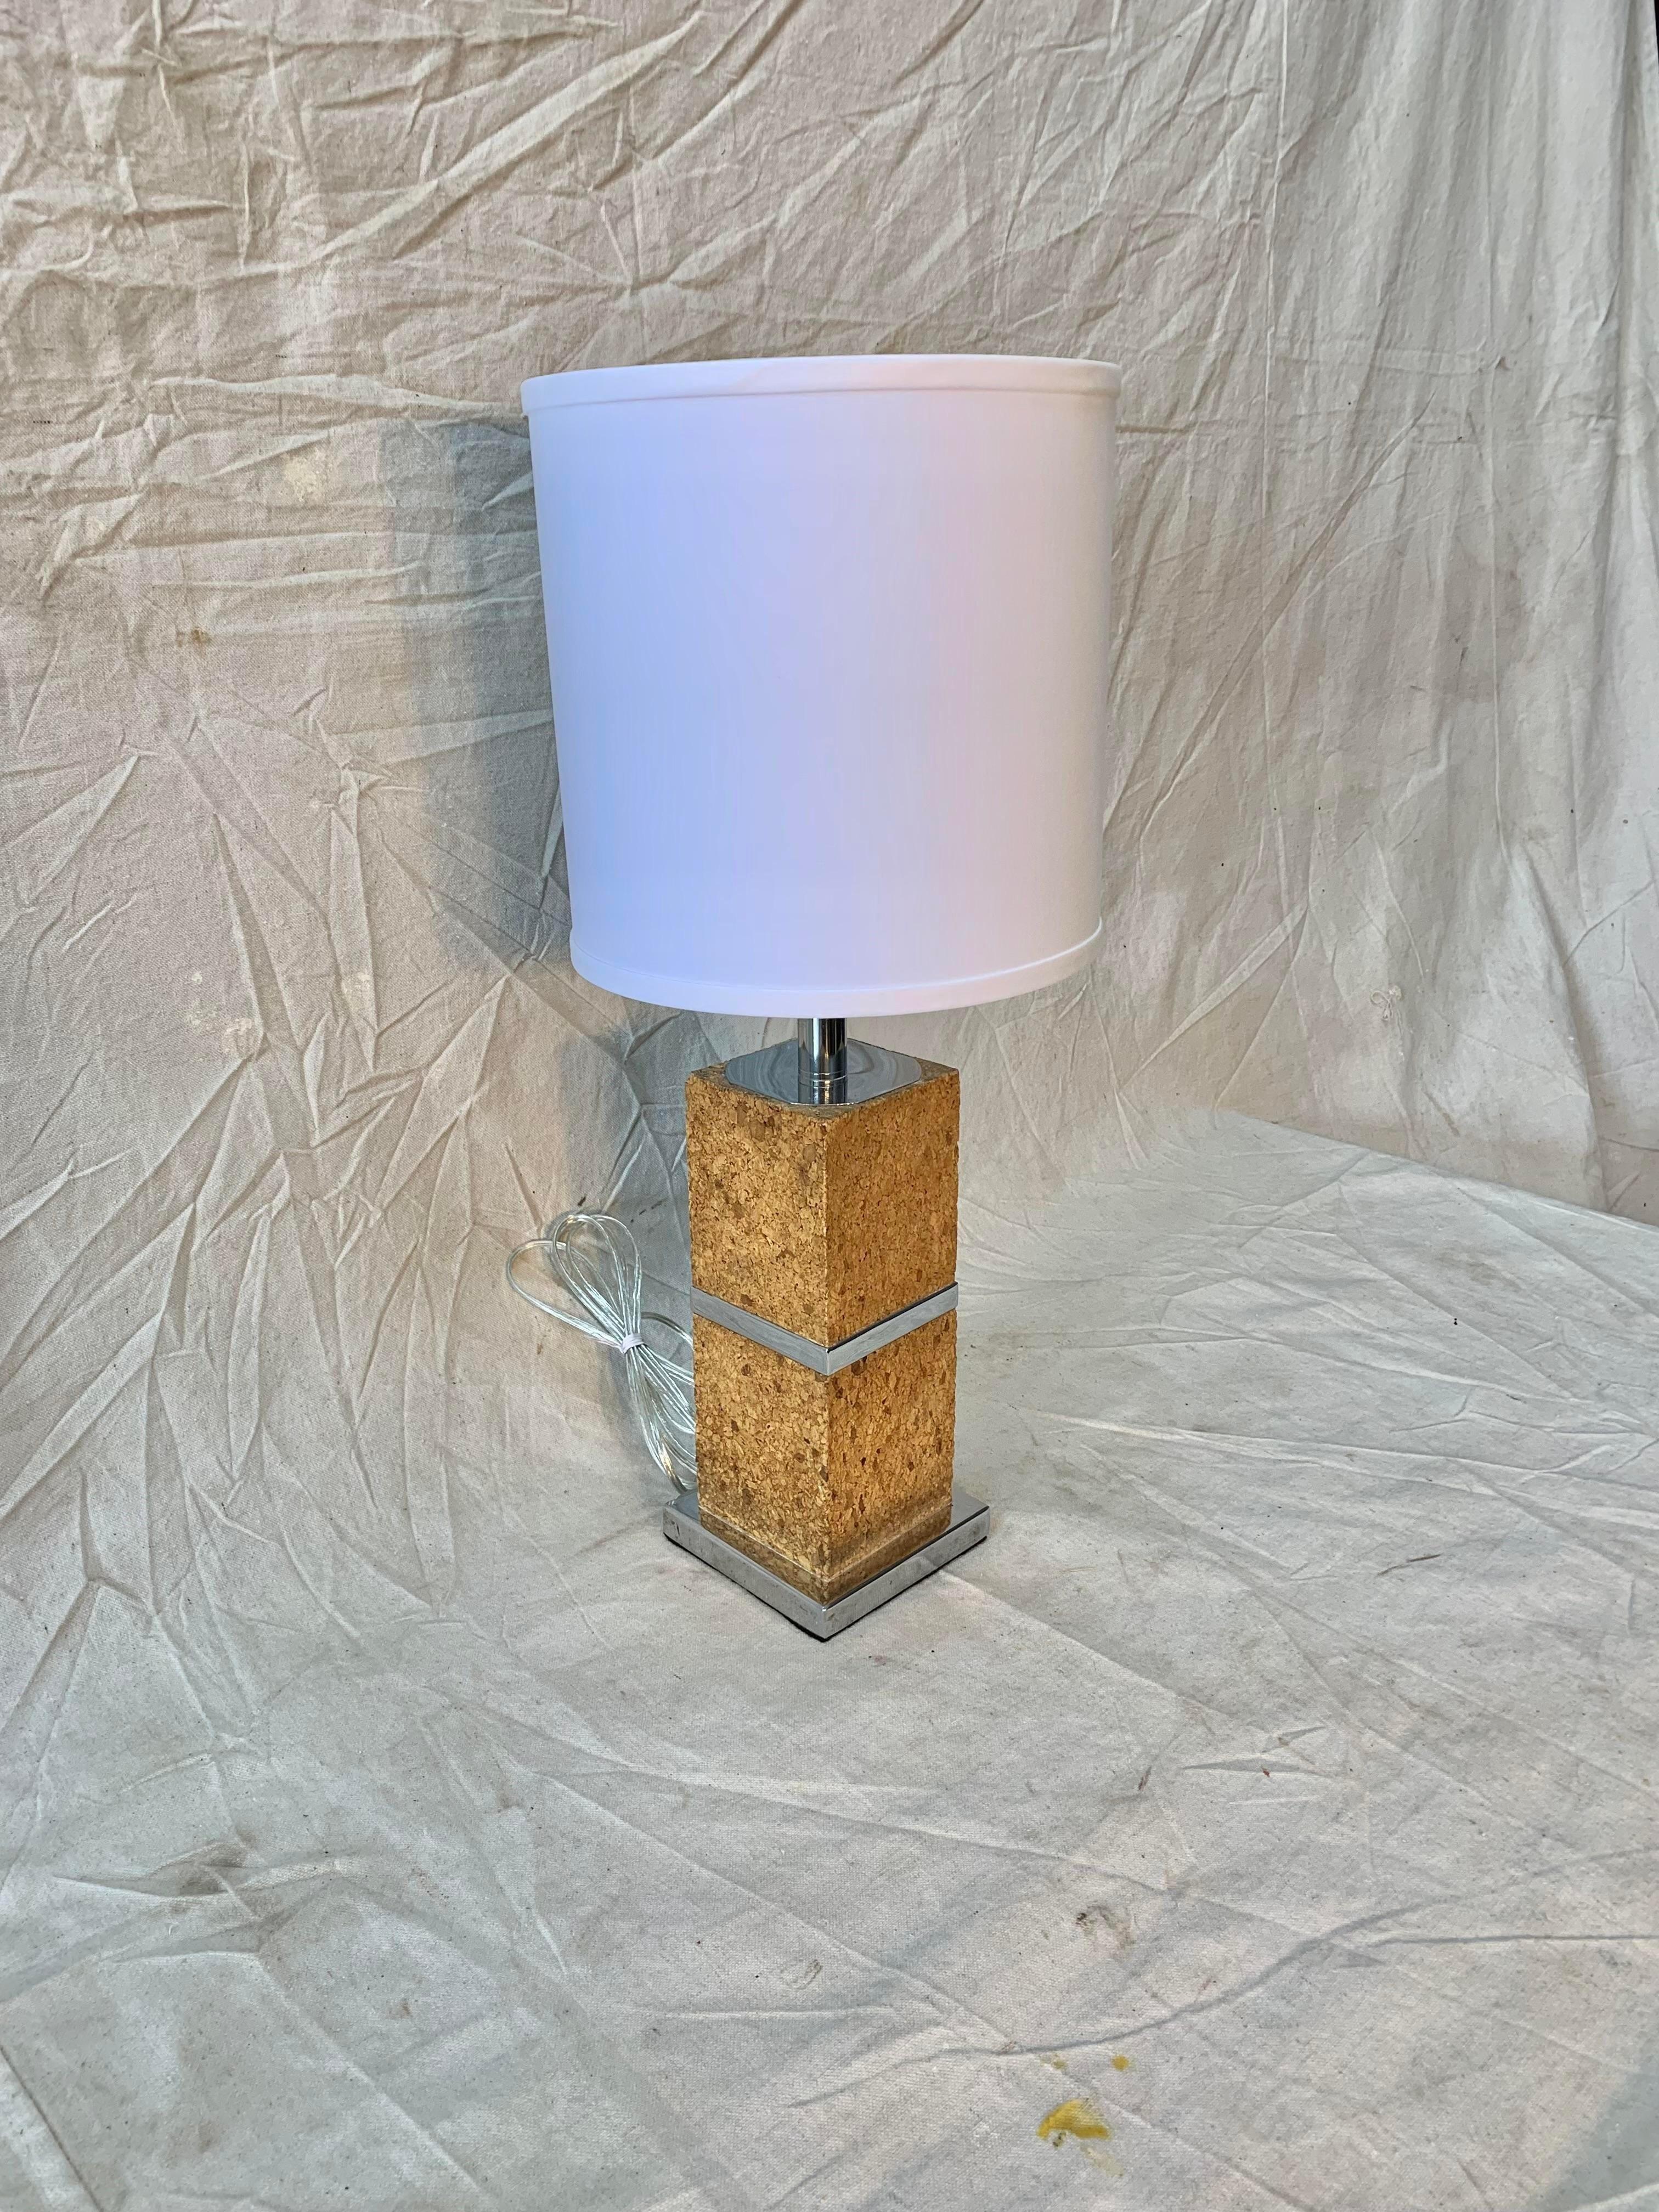 This French midcentury Cork and Chrome Table Lamp was made in the 1970s. The lamp features a square chrome base topped with a cork square column with a chrome band in the middle. In the 1970s cork was a interior design favorite and is presently